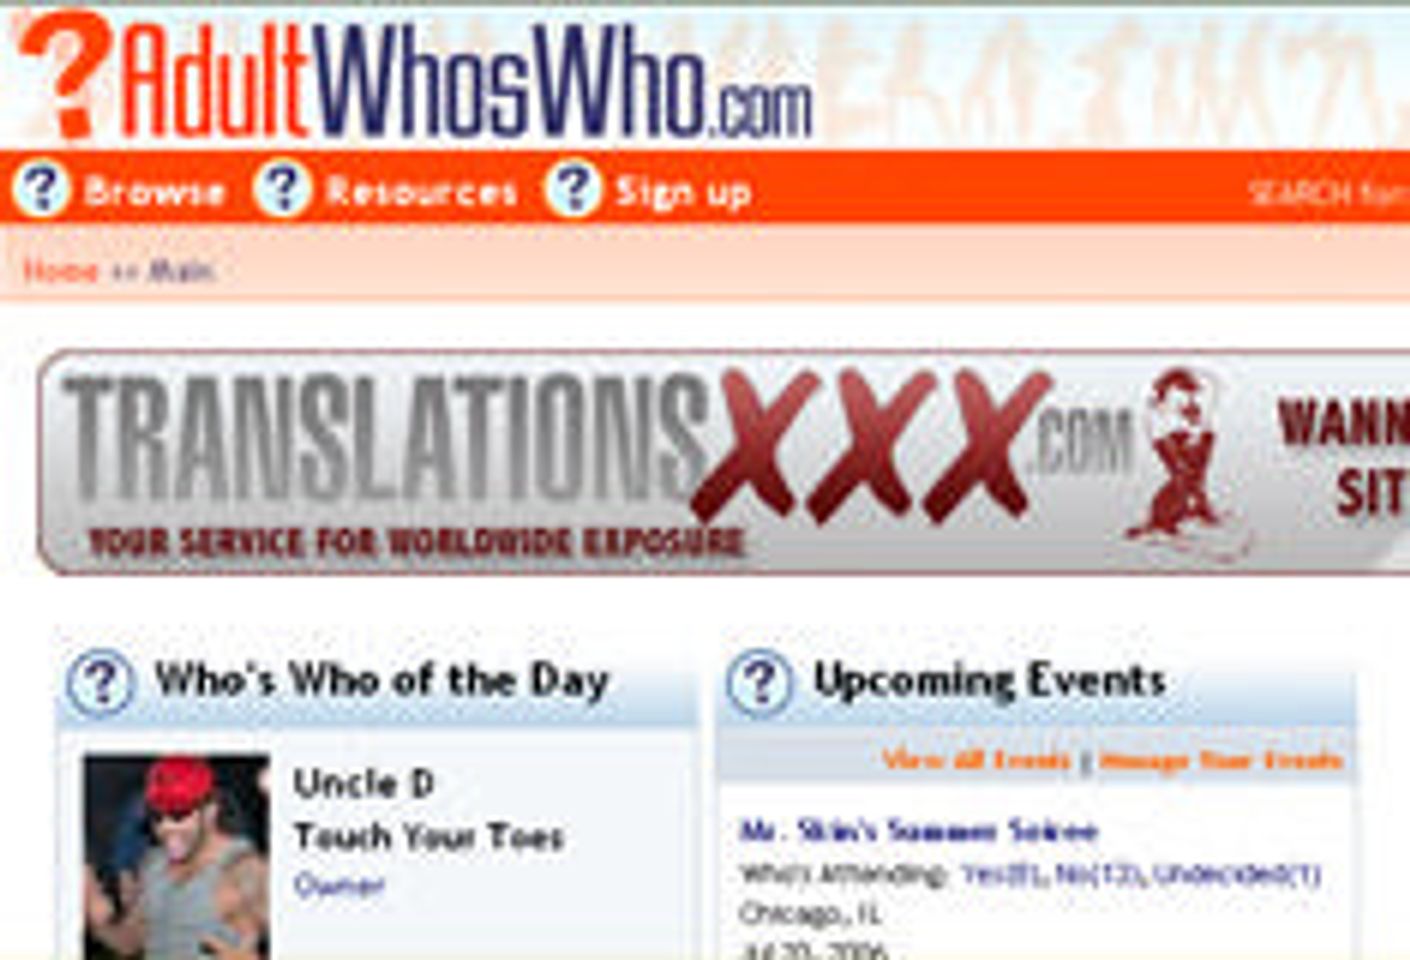 AdultWhosWho Launches Scheduling for Events